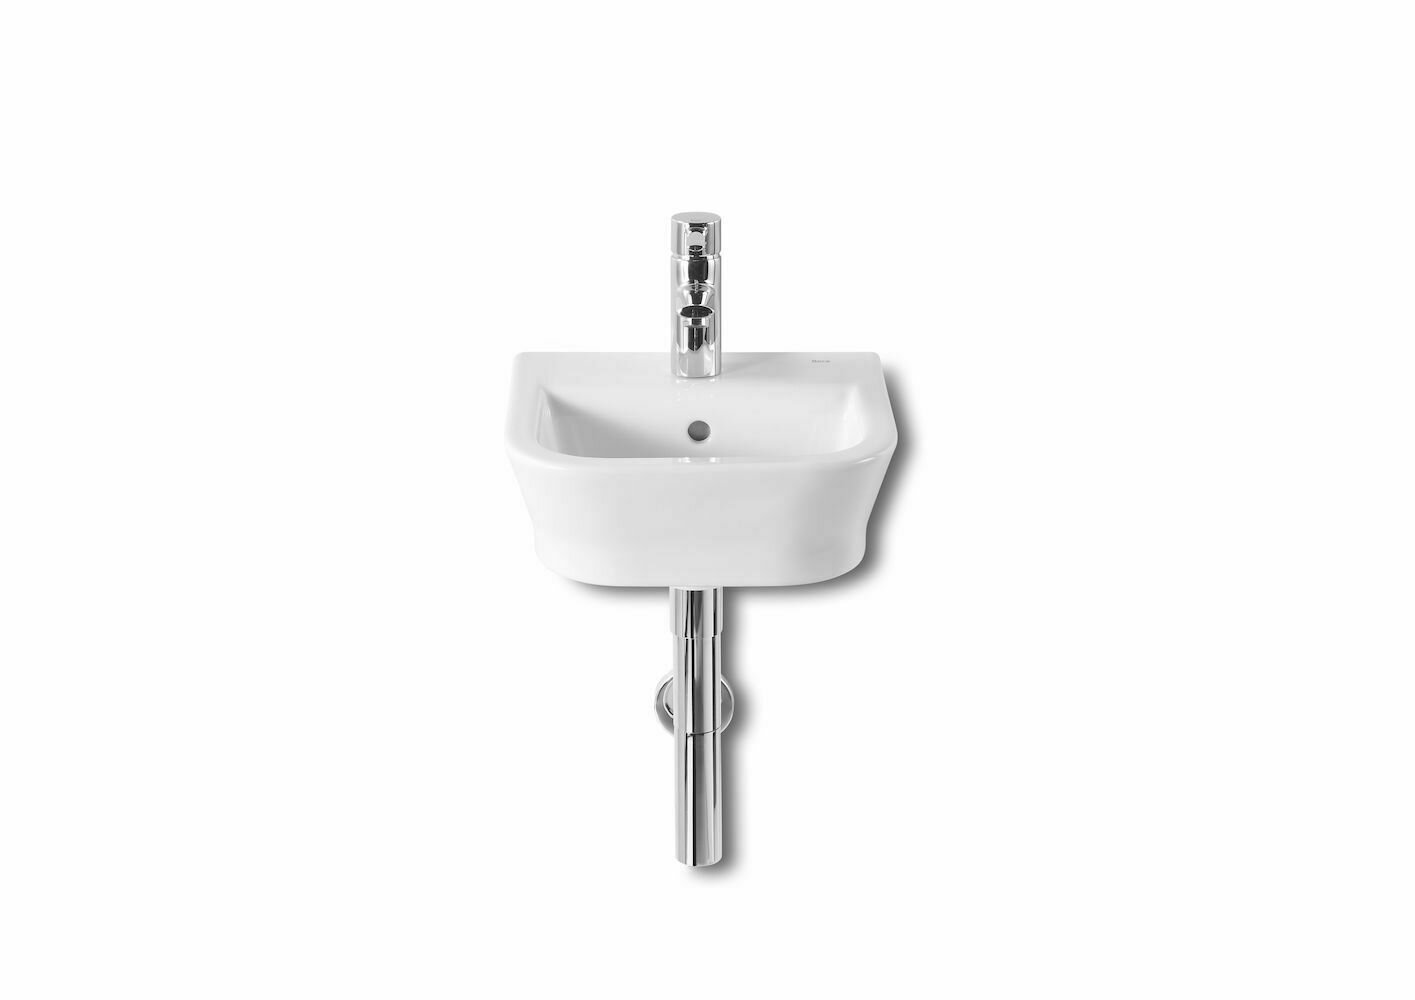 Roca The Gap Cloakroom or Countertop Basin ONLY 1TH 350 x 320mm A327479000